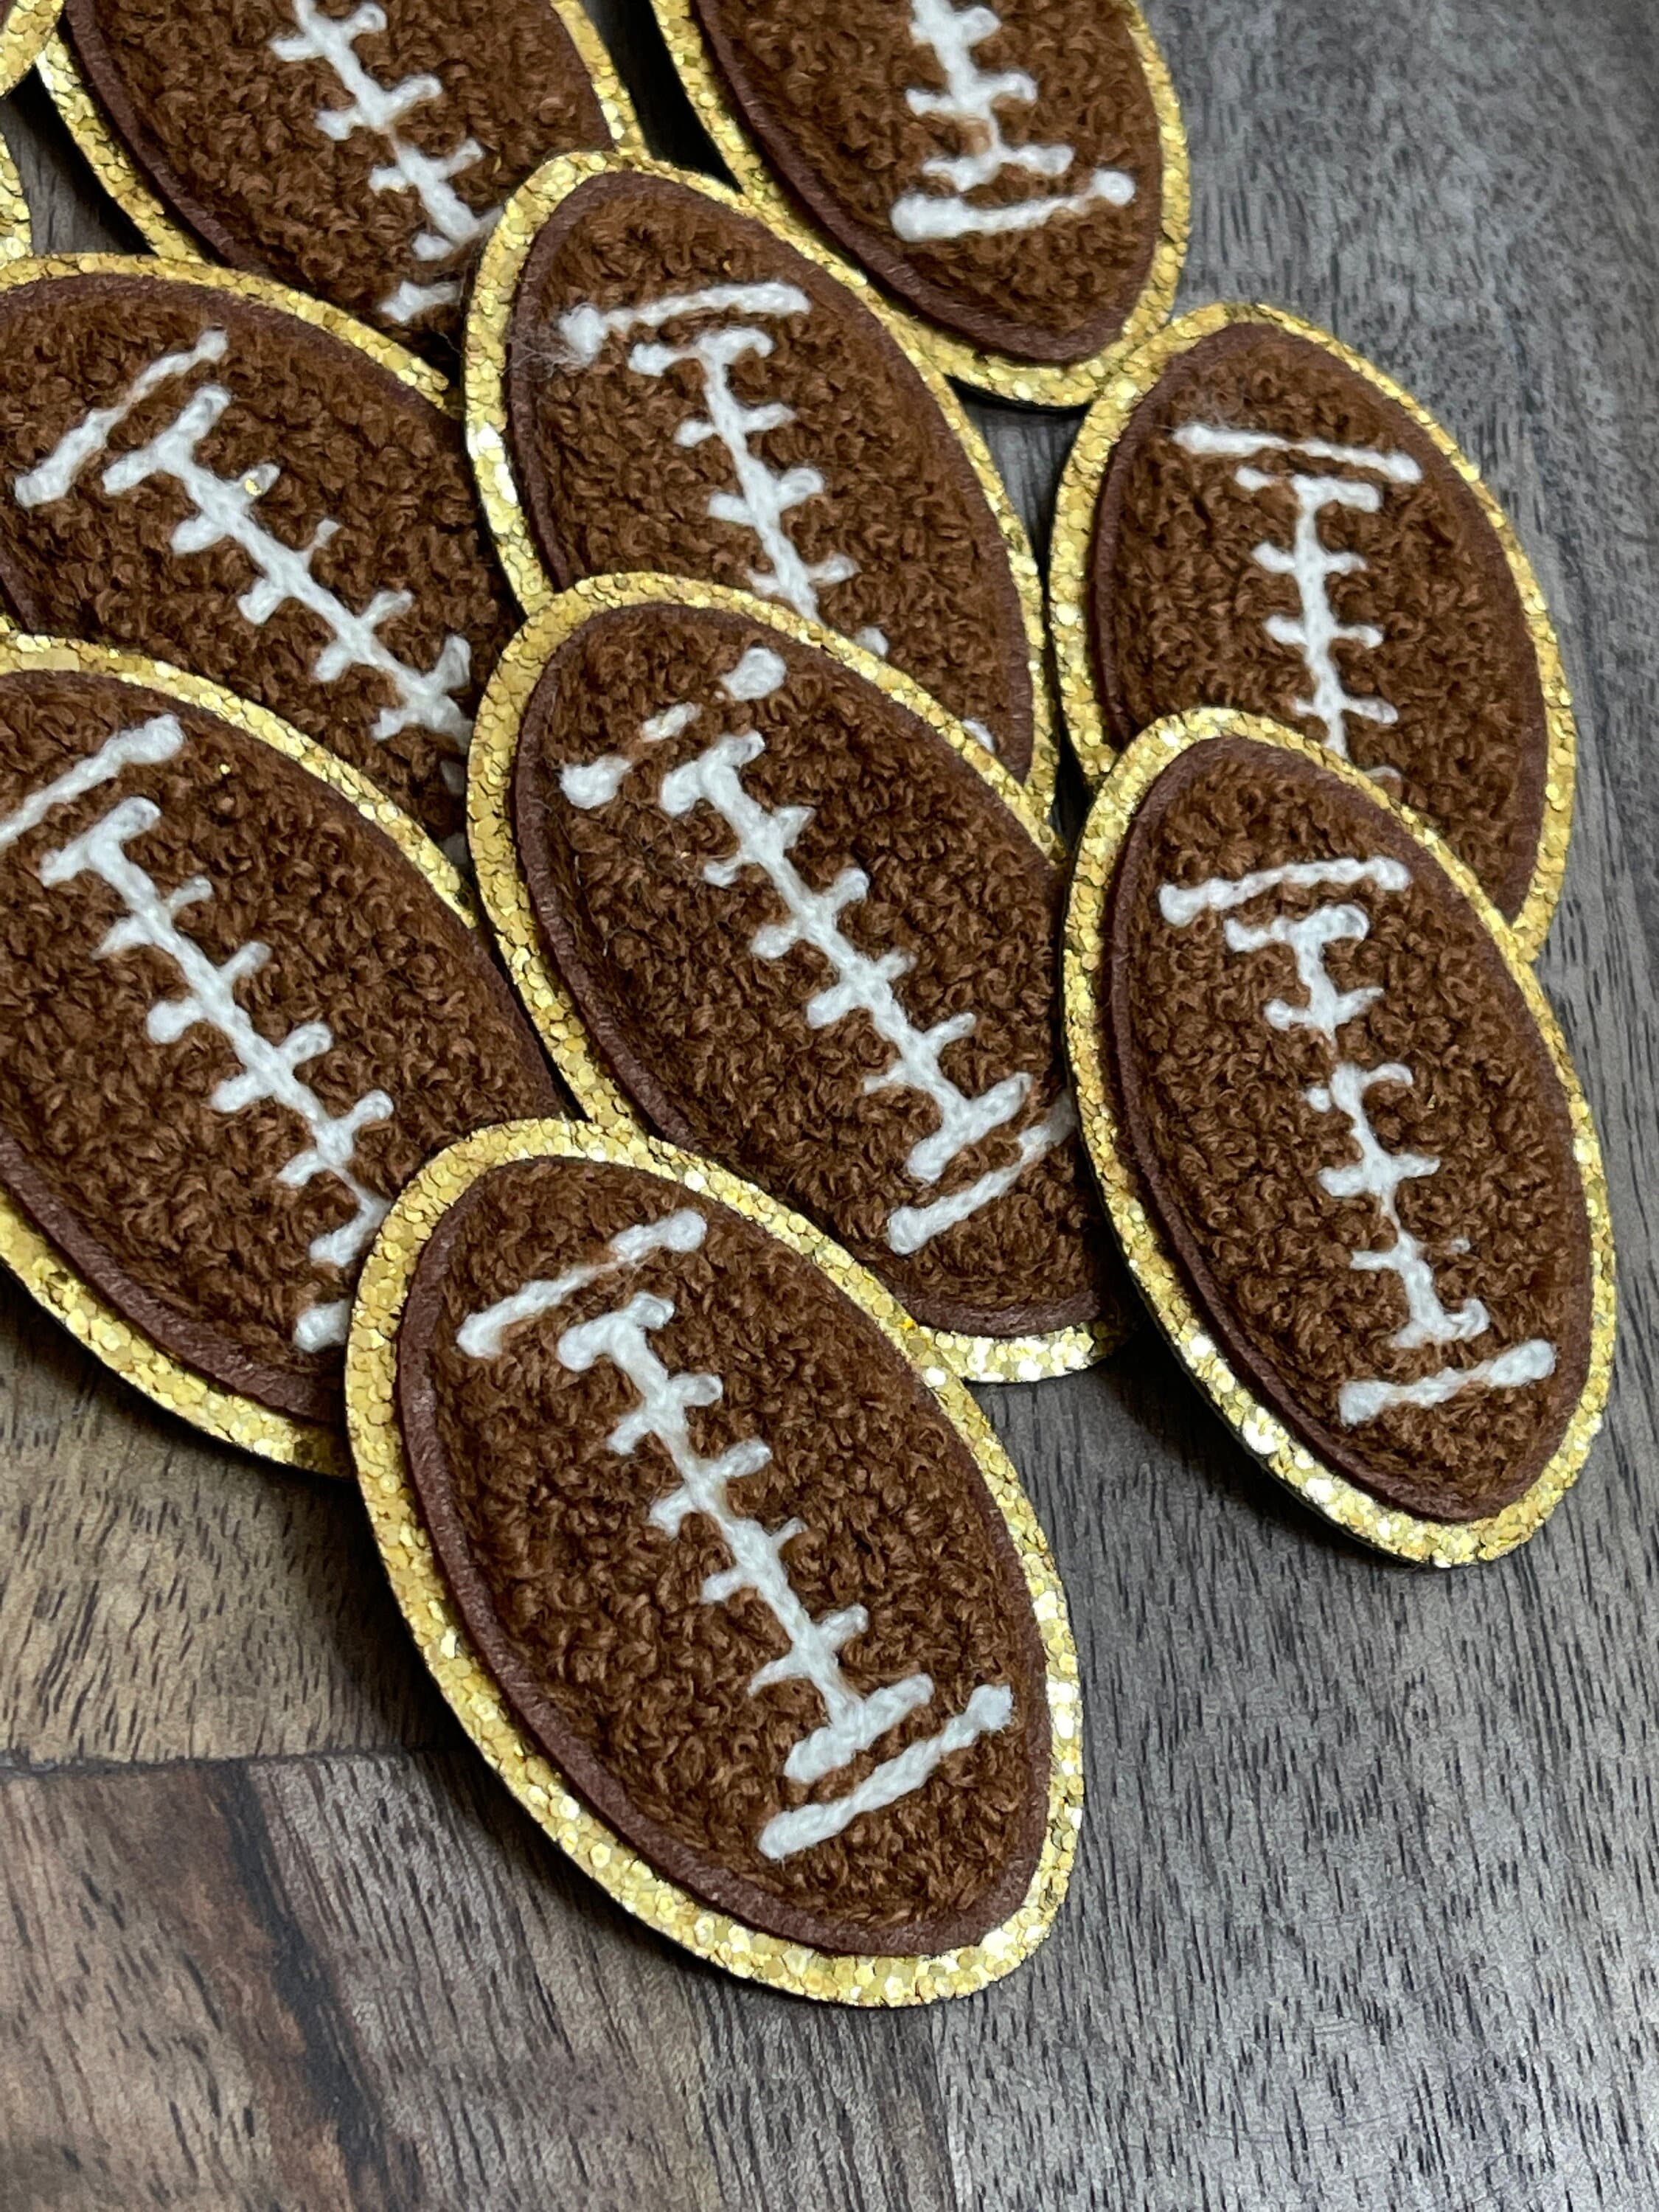 Patches Chenille Football Baseball Basketball Soccer Rugby Iron on Patch  Clothes 